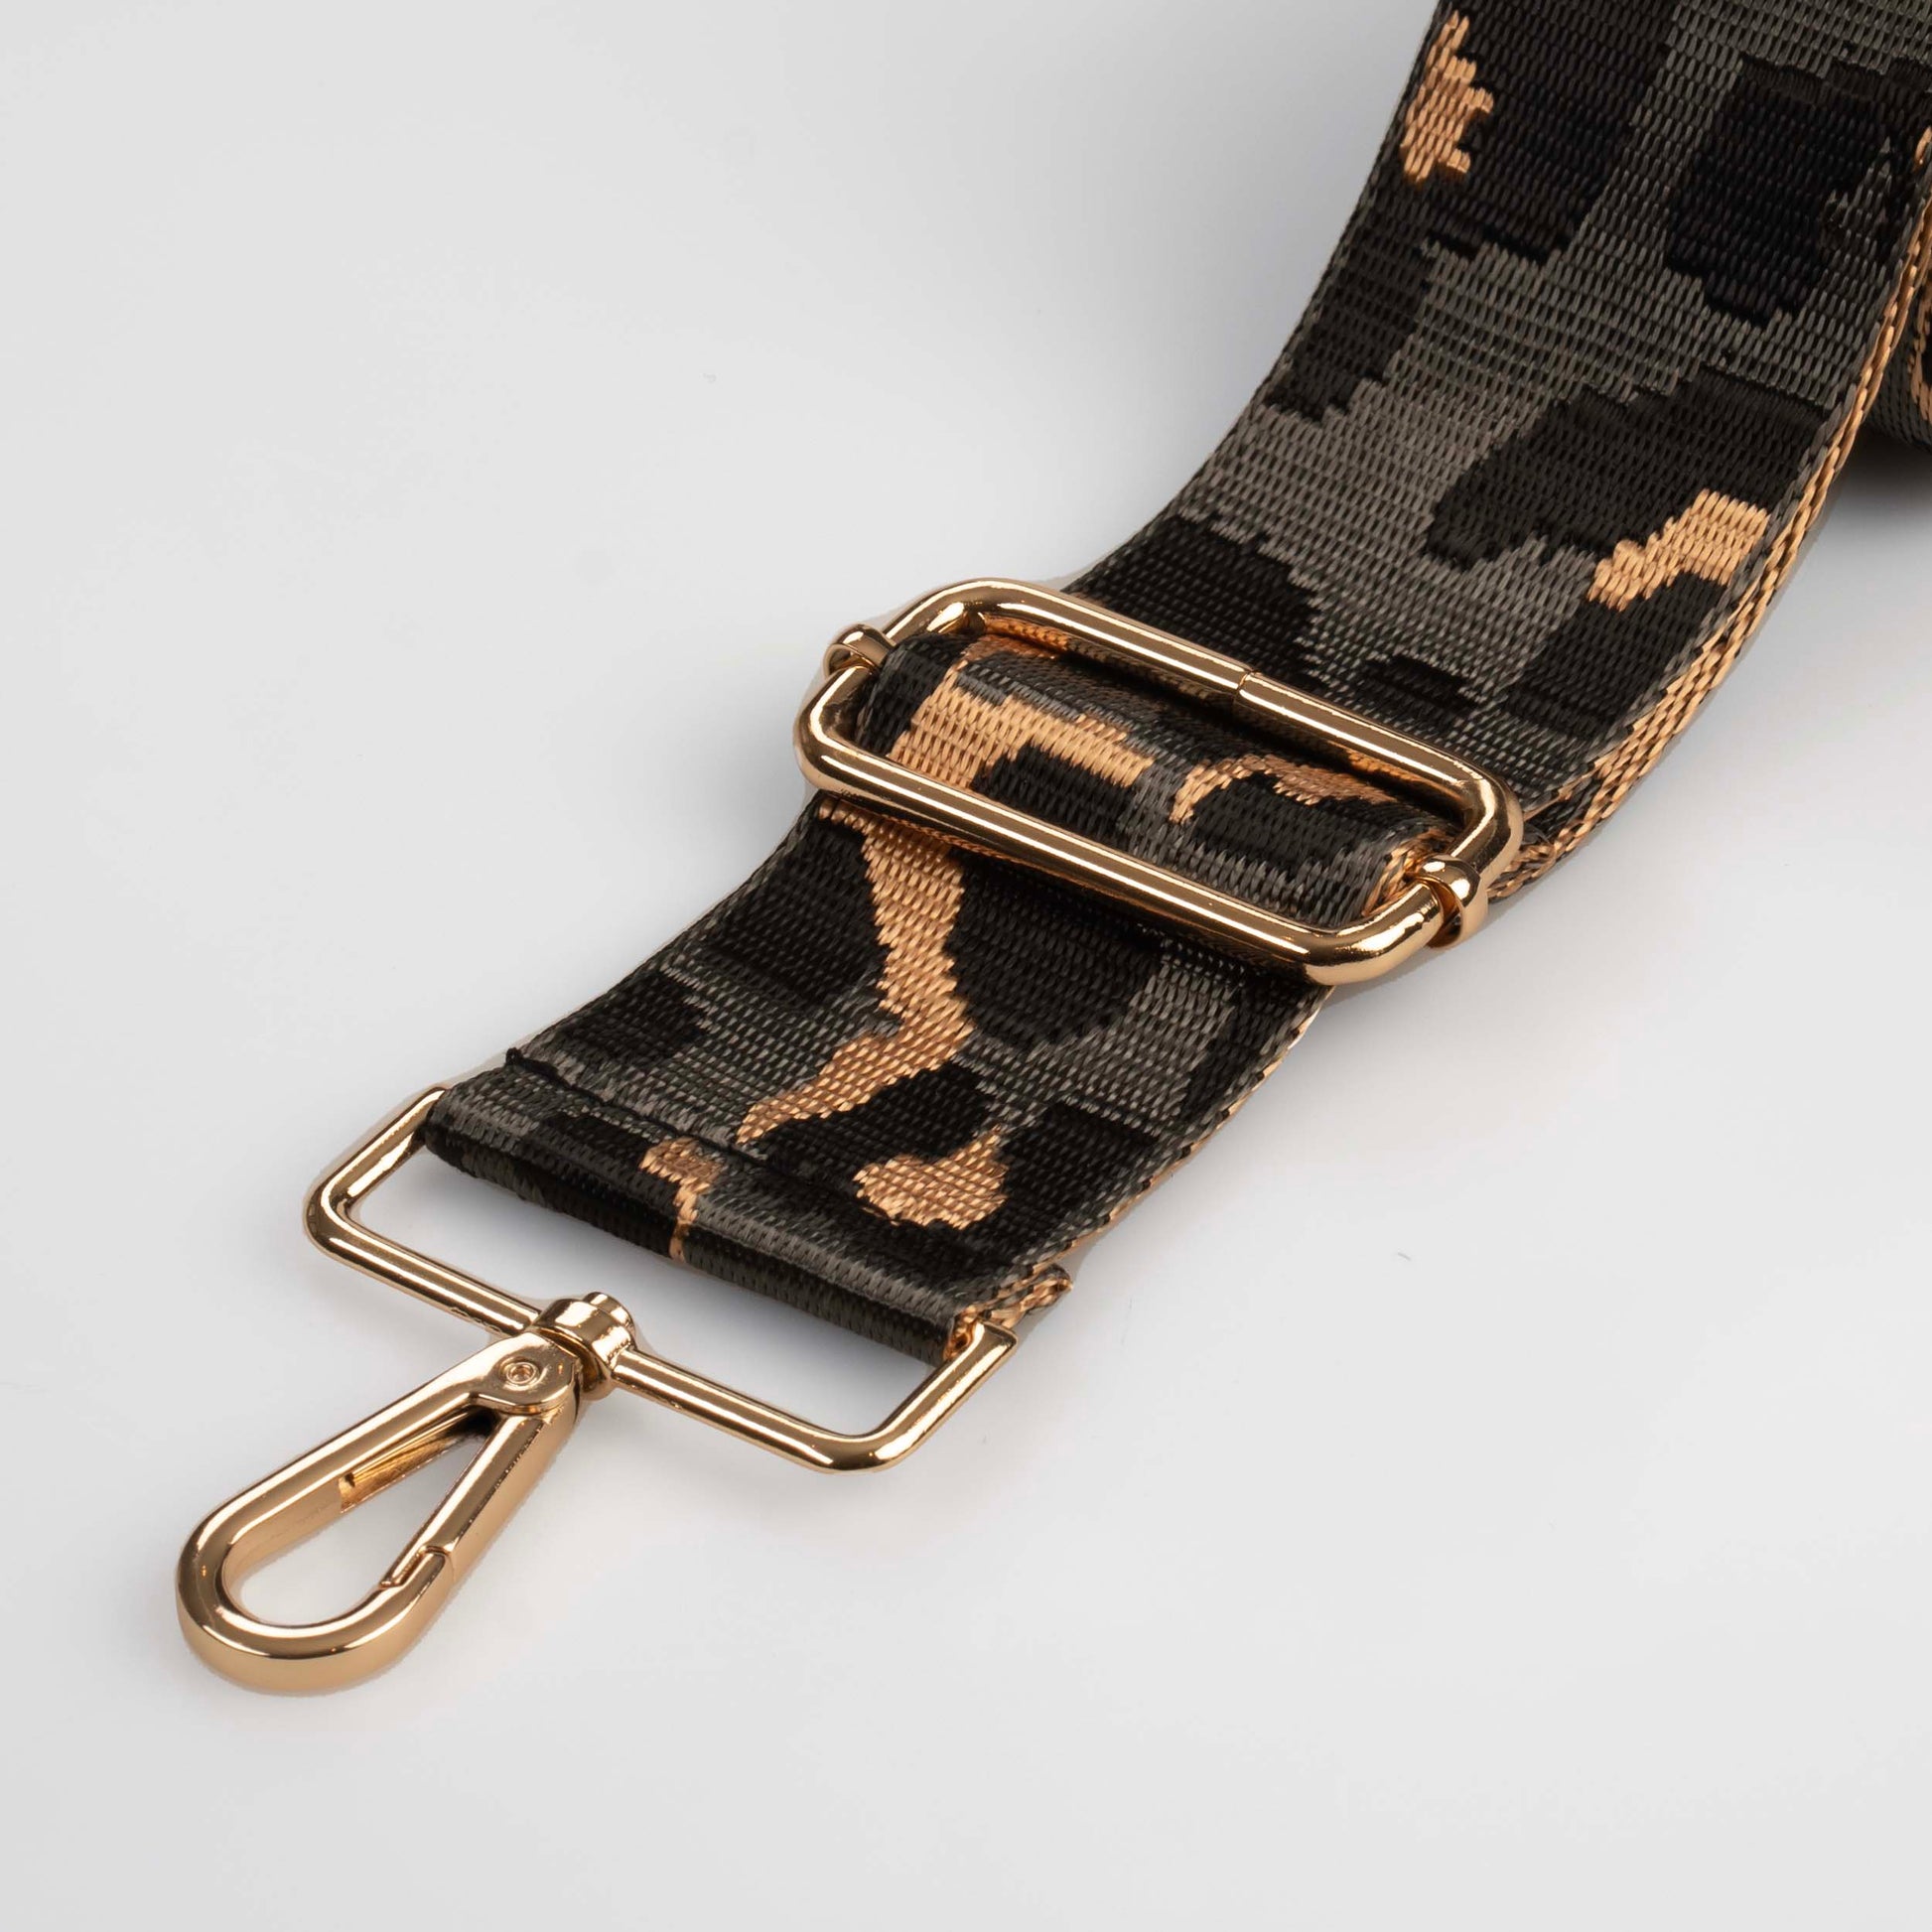 Grey Camo Bag Strap by Swoon London